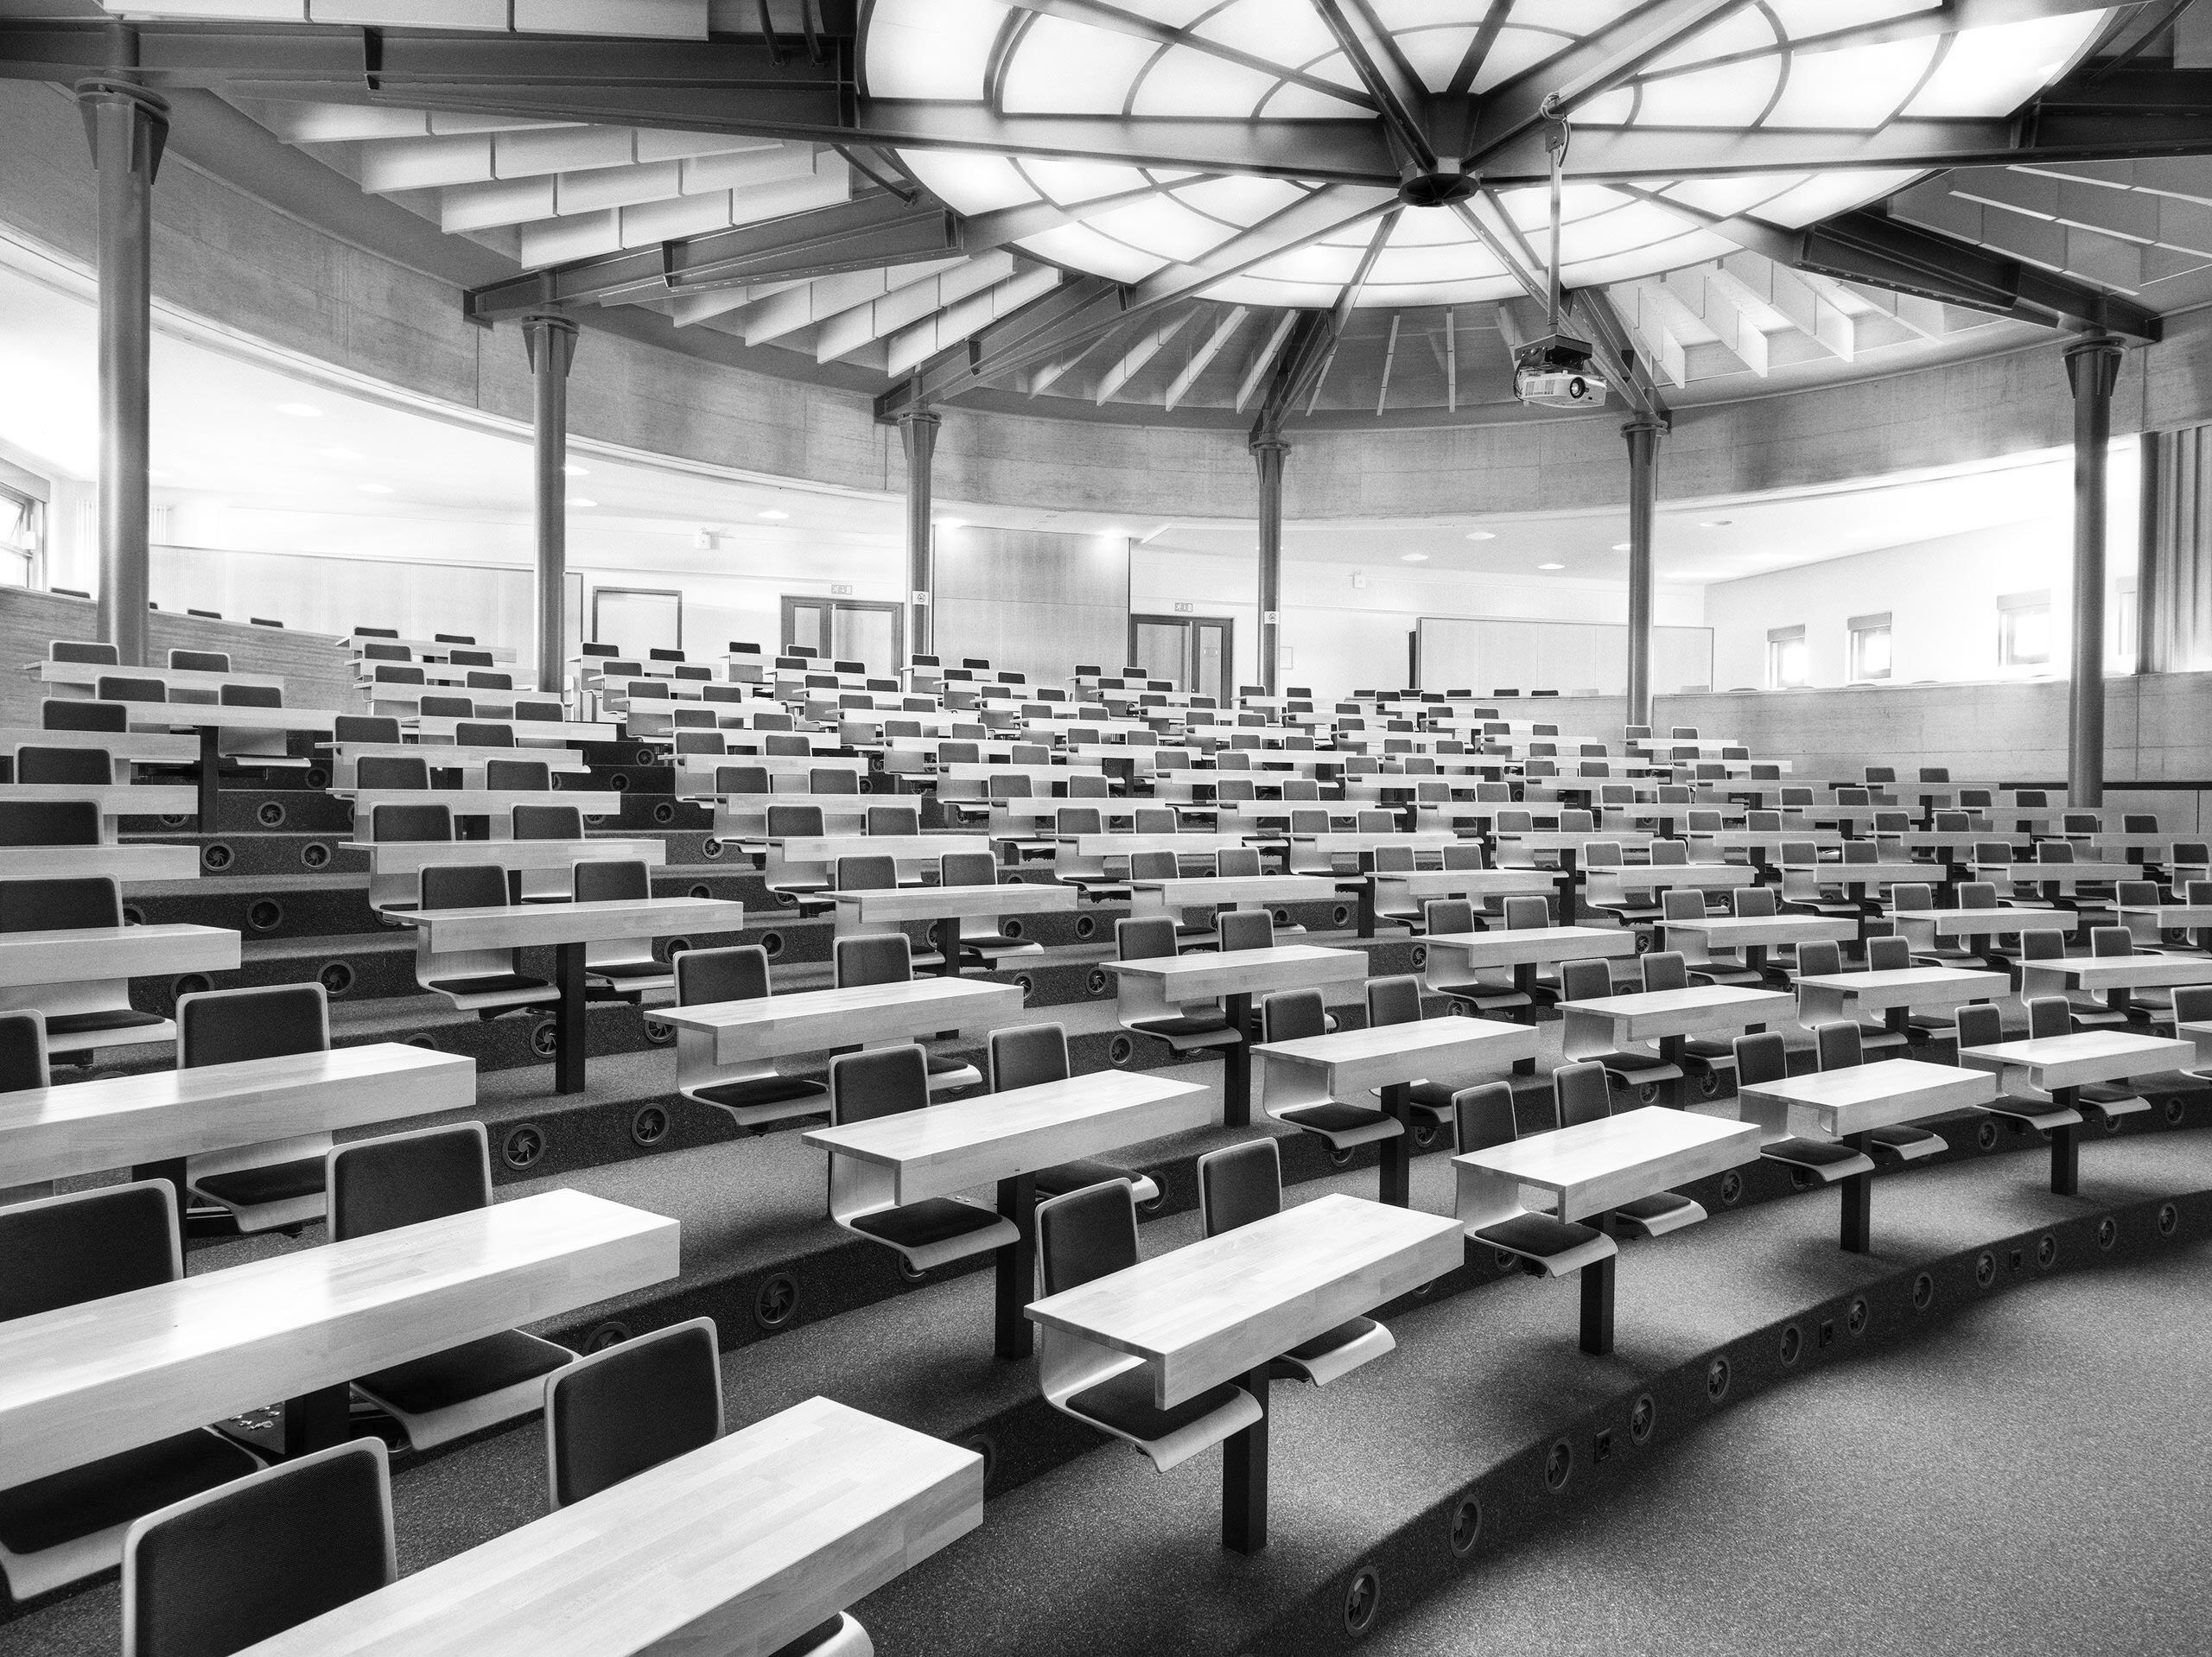 A monochrome image of a lecture hall with neatly arranged rows of chairs